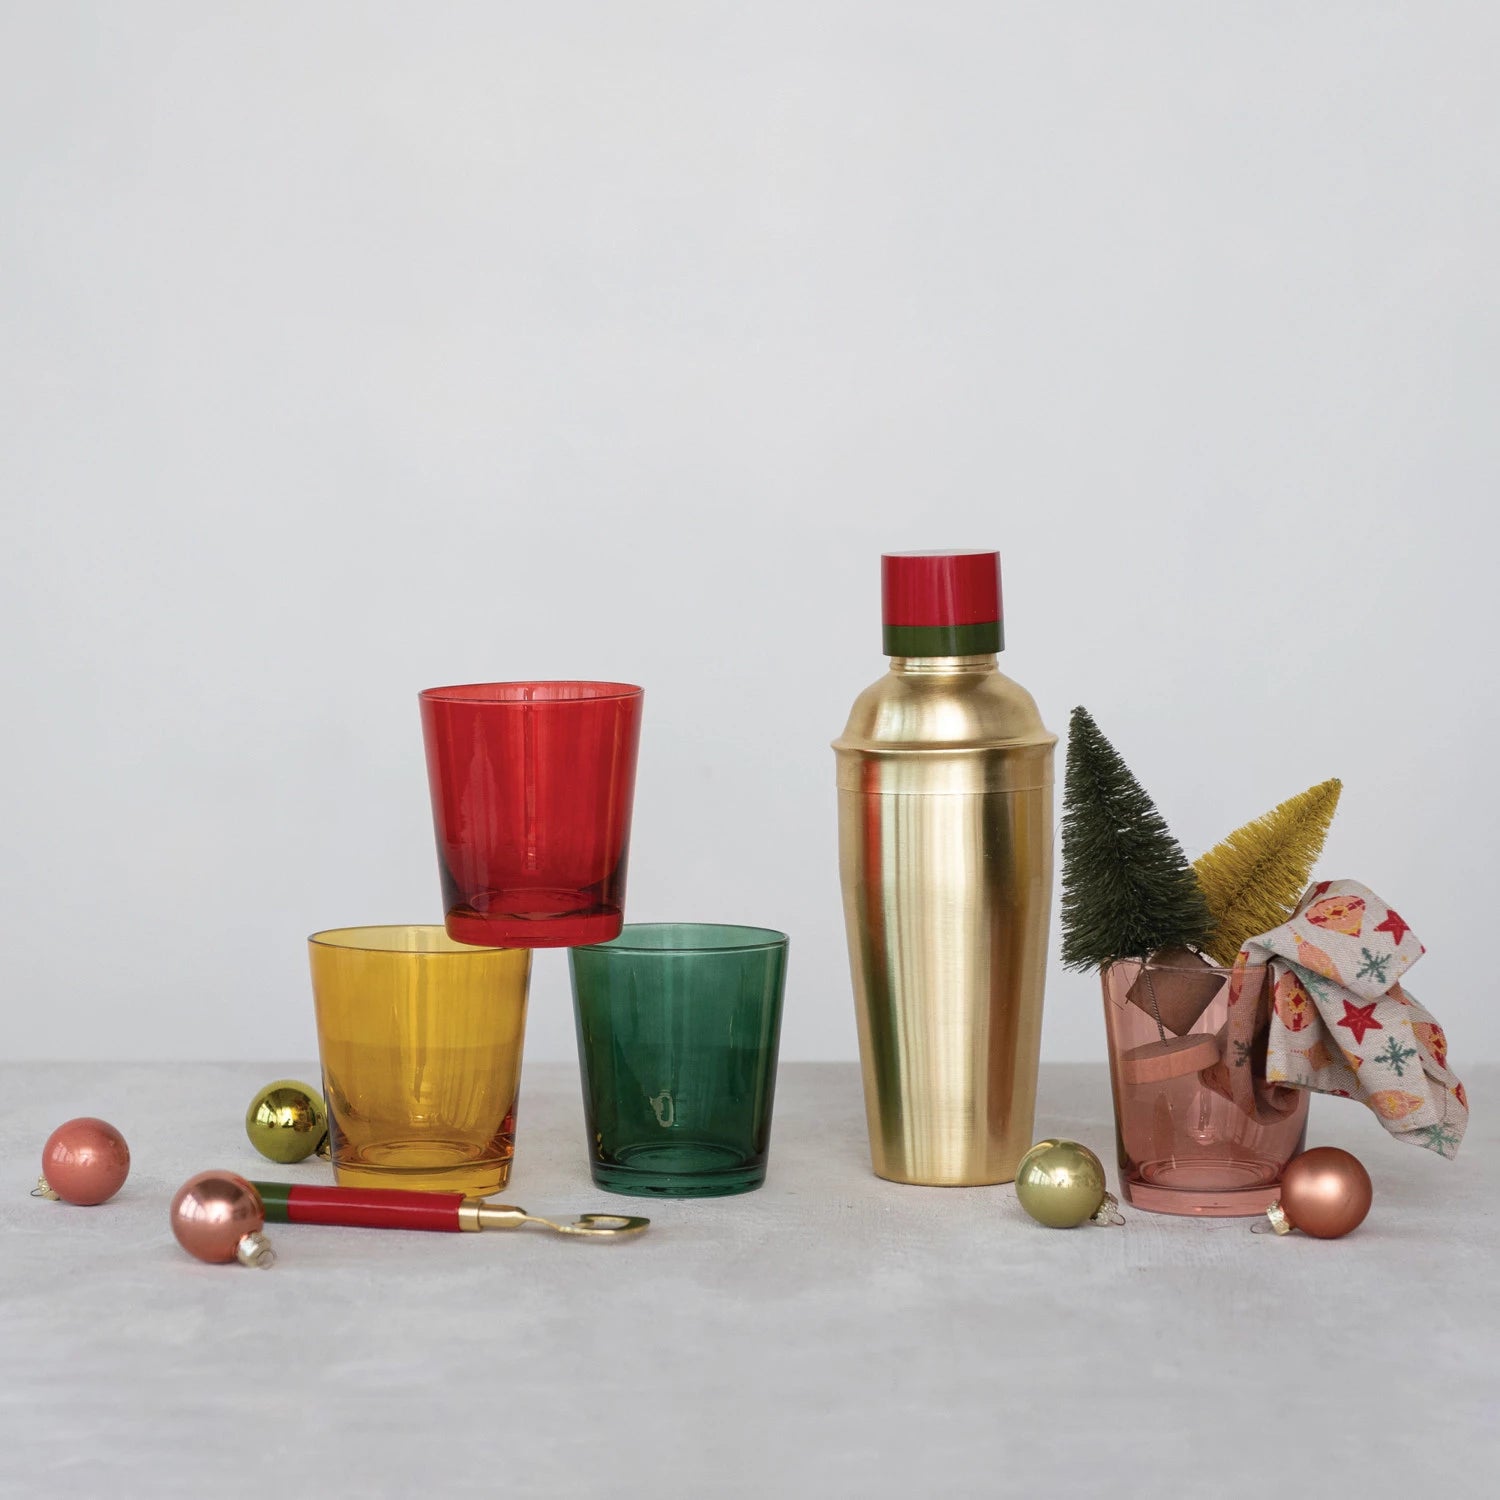 all four colors of low ball drinking glasses displayed next to a gold cocktail shaker, small ornaments, bottle opener, and small bottle brush trees against a light gray background